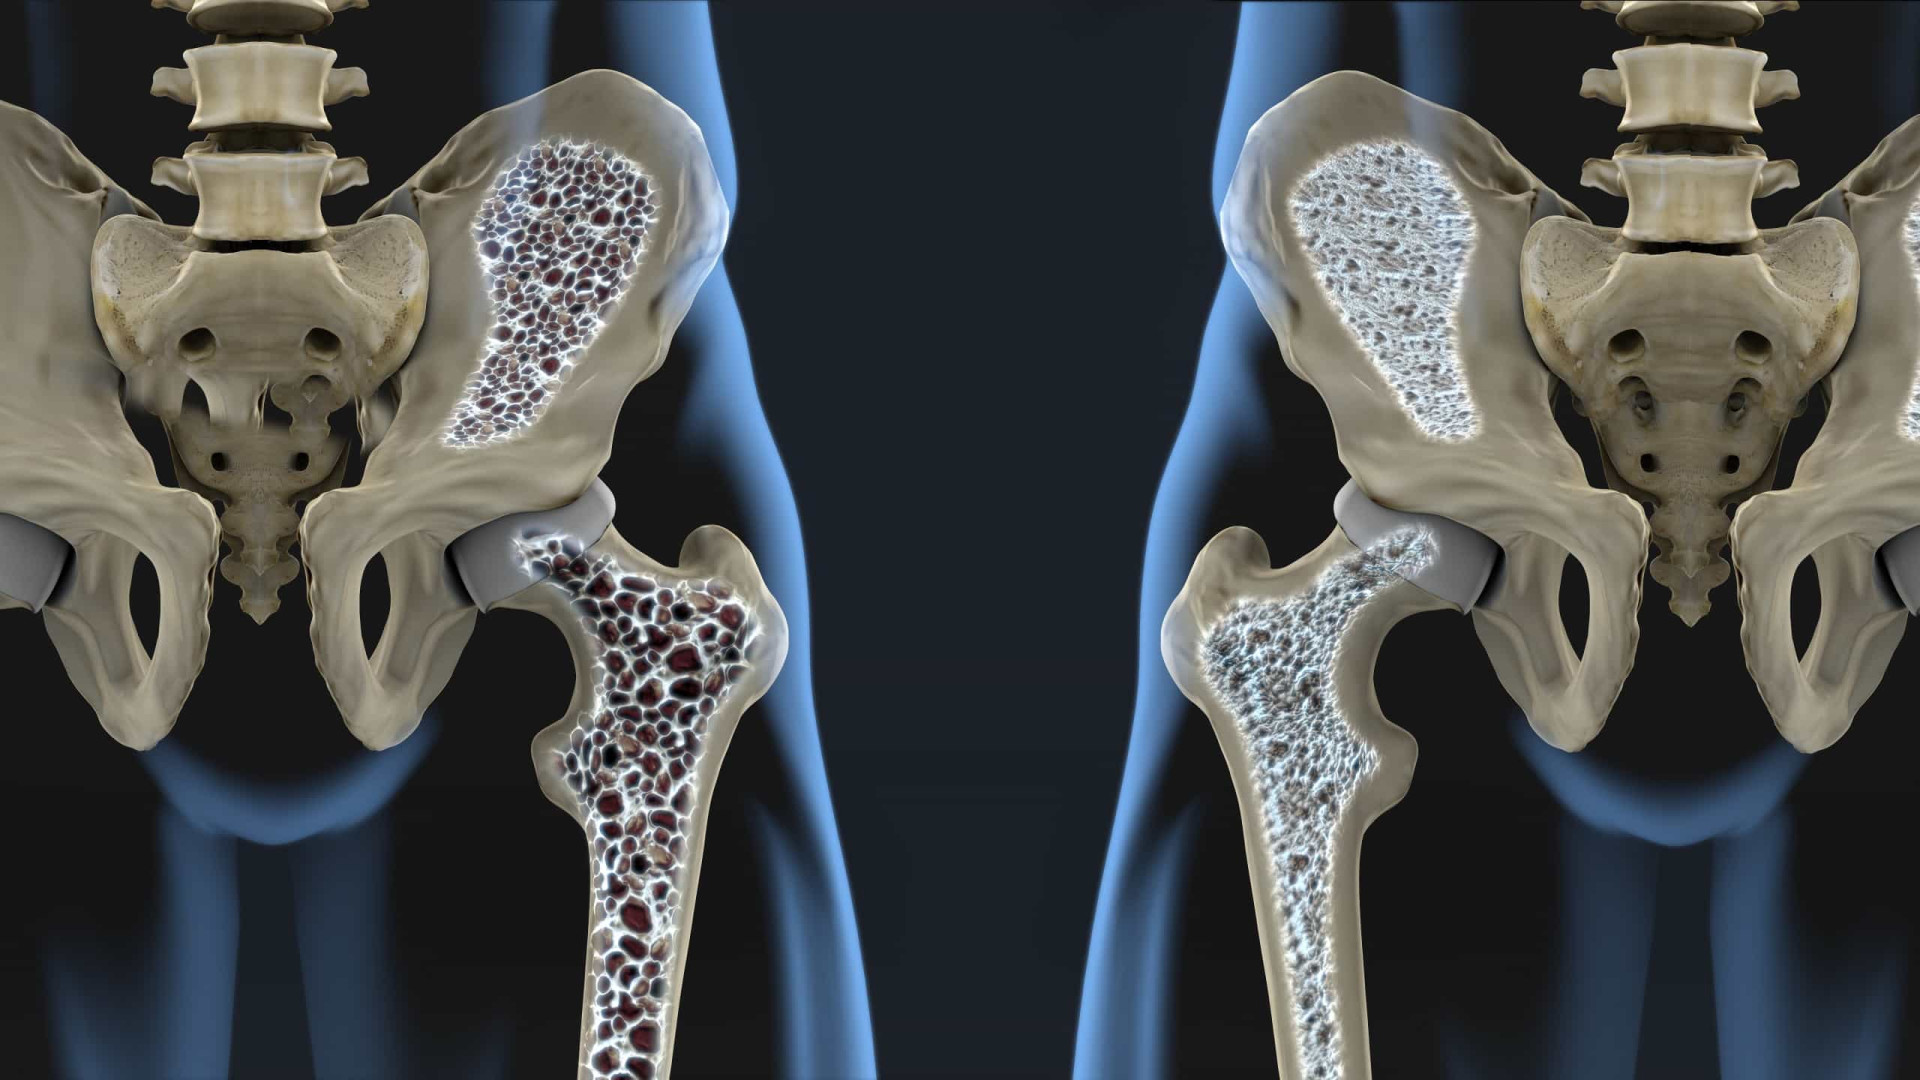 <p><span>This will help you avoid conditions such as <a href="https://www.starsinsider.com/lifestyle/187513/osteoporosis-the-silent-disease" rel="noopener">osteoporosis</a> and osteopenia, which are linked to low bone density. </span></p><p>You may also like:<a href="https://www.starsinsider.com/n/119097?utm_source=msn.com&utm_medium=display&utm_campaign=referral_description&utm_content=434051v2en-en"> Harmful to health: the hidden hazards of food and drink </a></p>